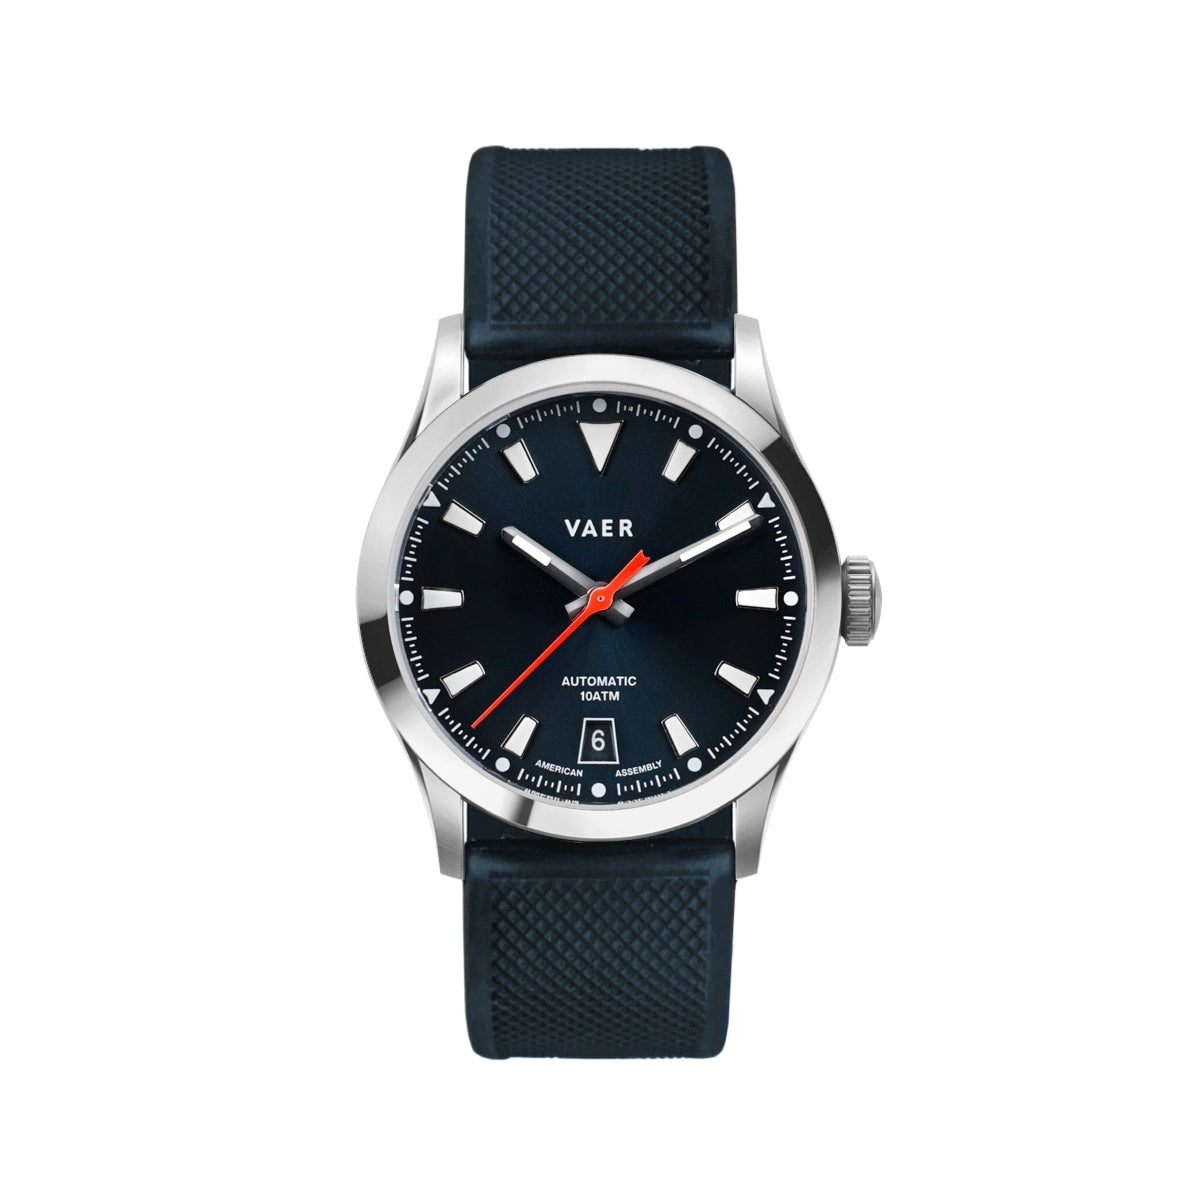 Vaer D5 Meridian: A High-Quality and Affordable Mechanical Watch